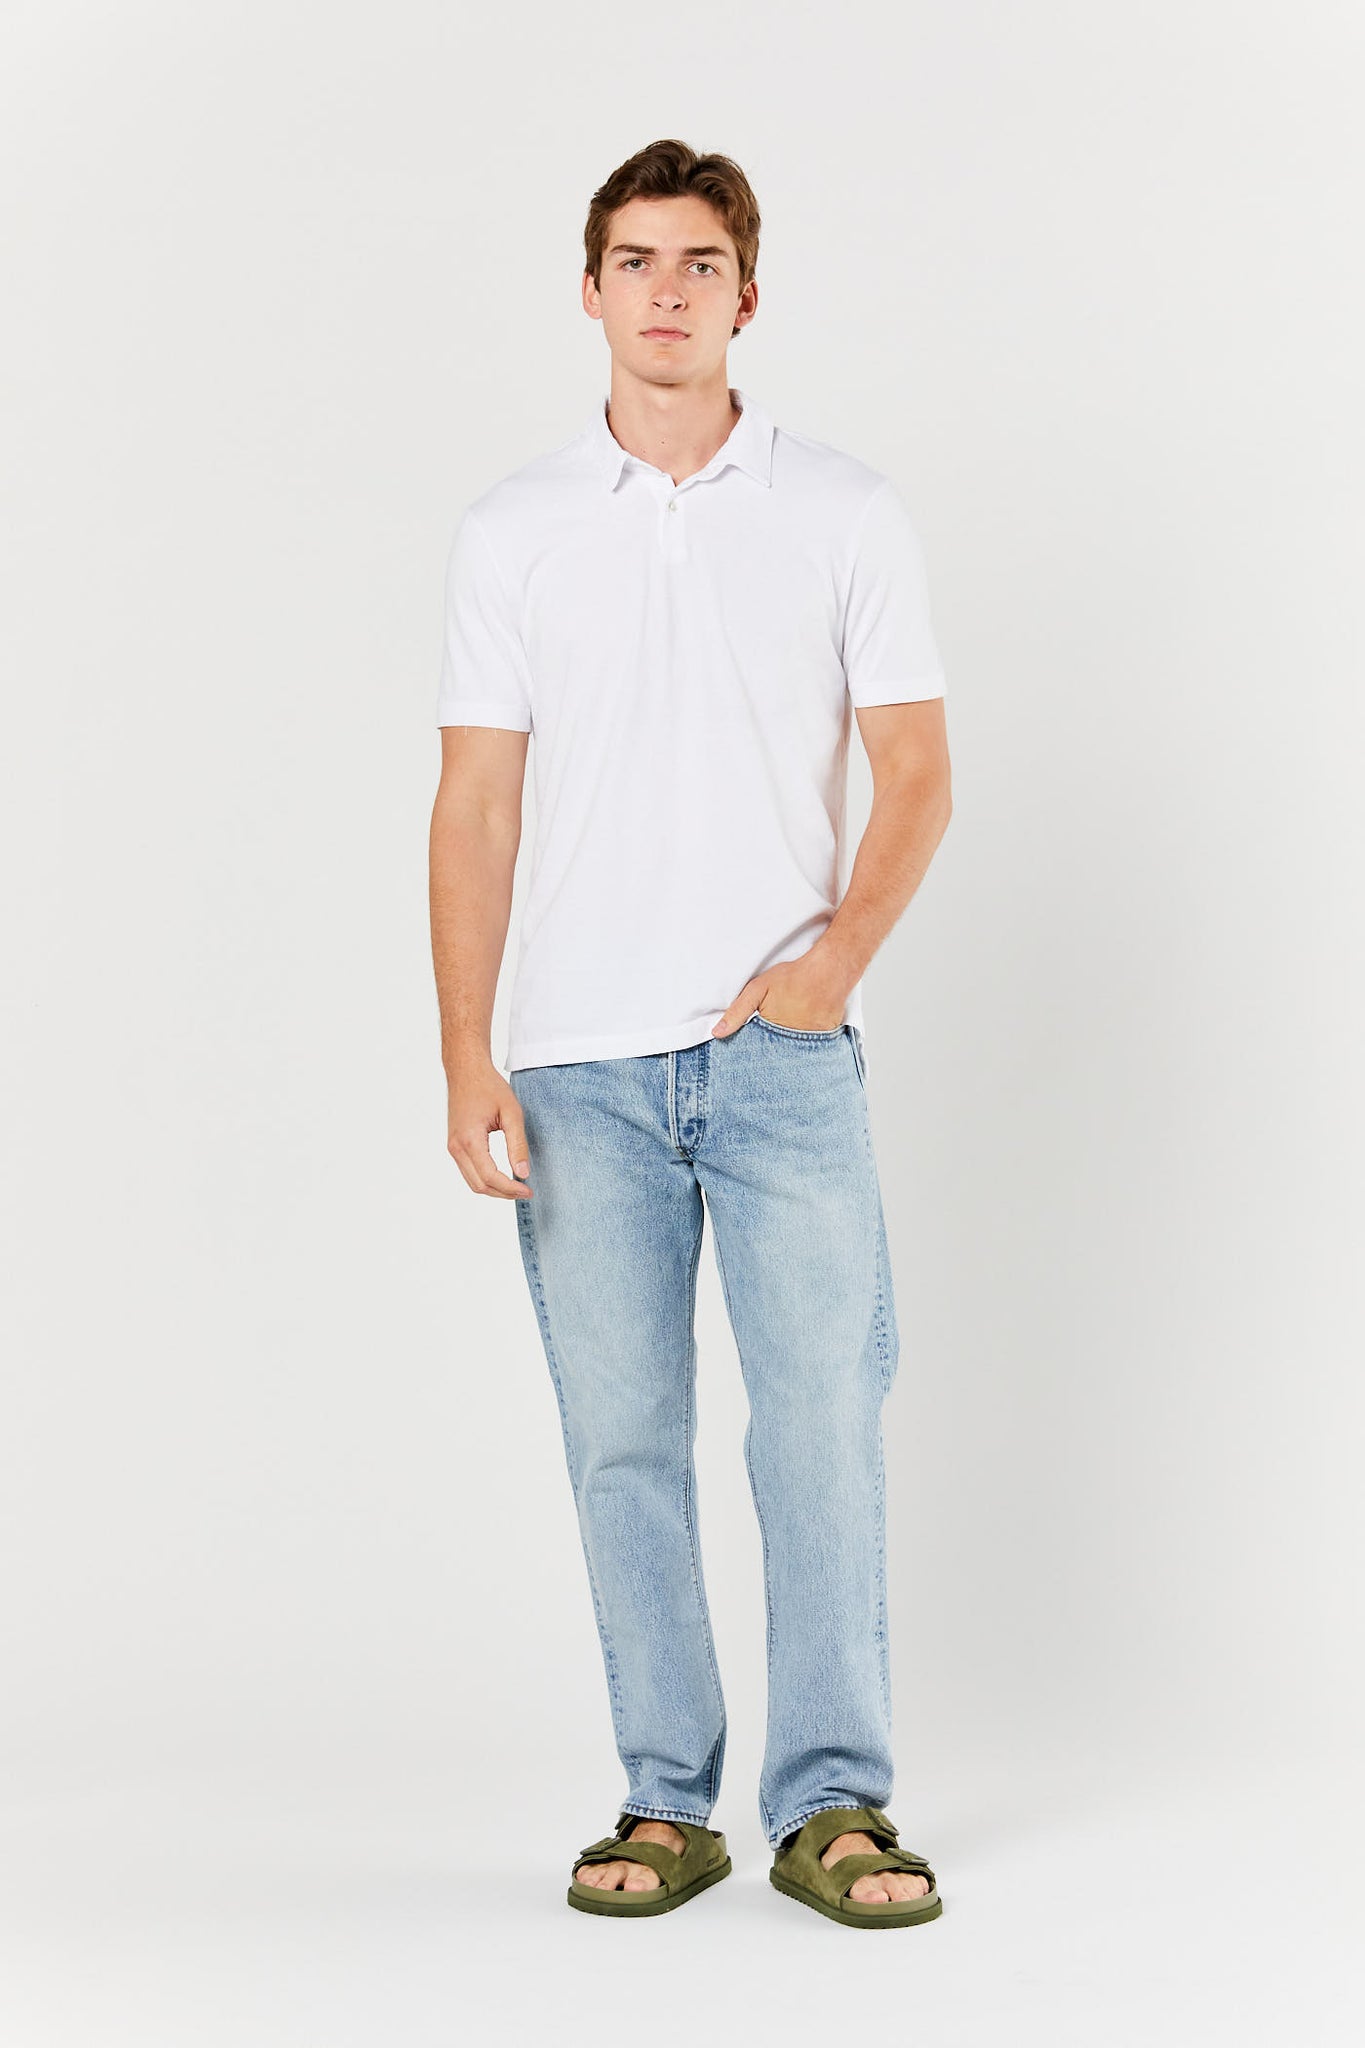 White Revised Standard Polo